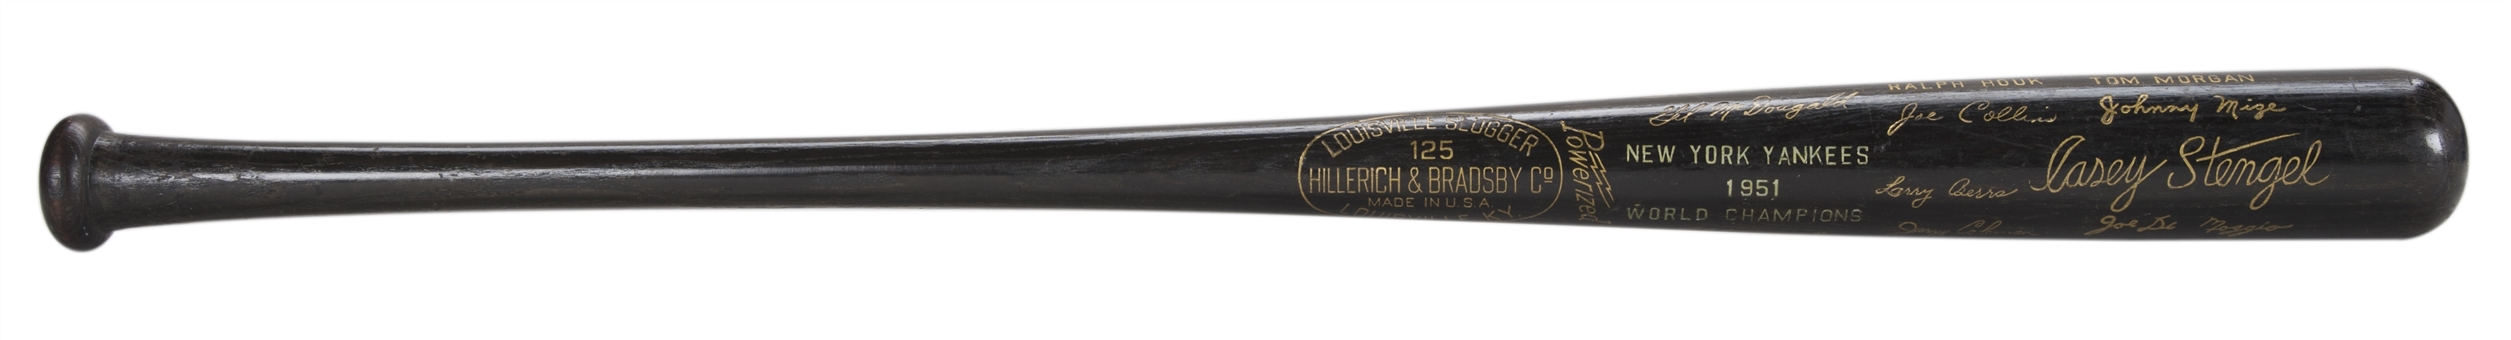 1951 World Champions New York Yankees Hillerich & Bradsby Black Bat With Facsimile Signatures